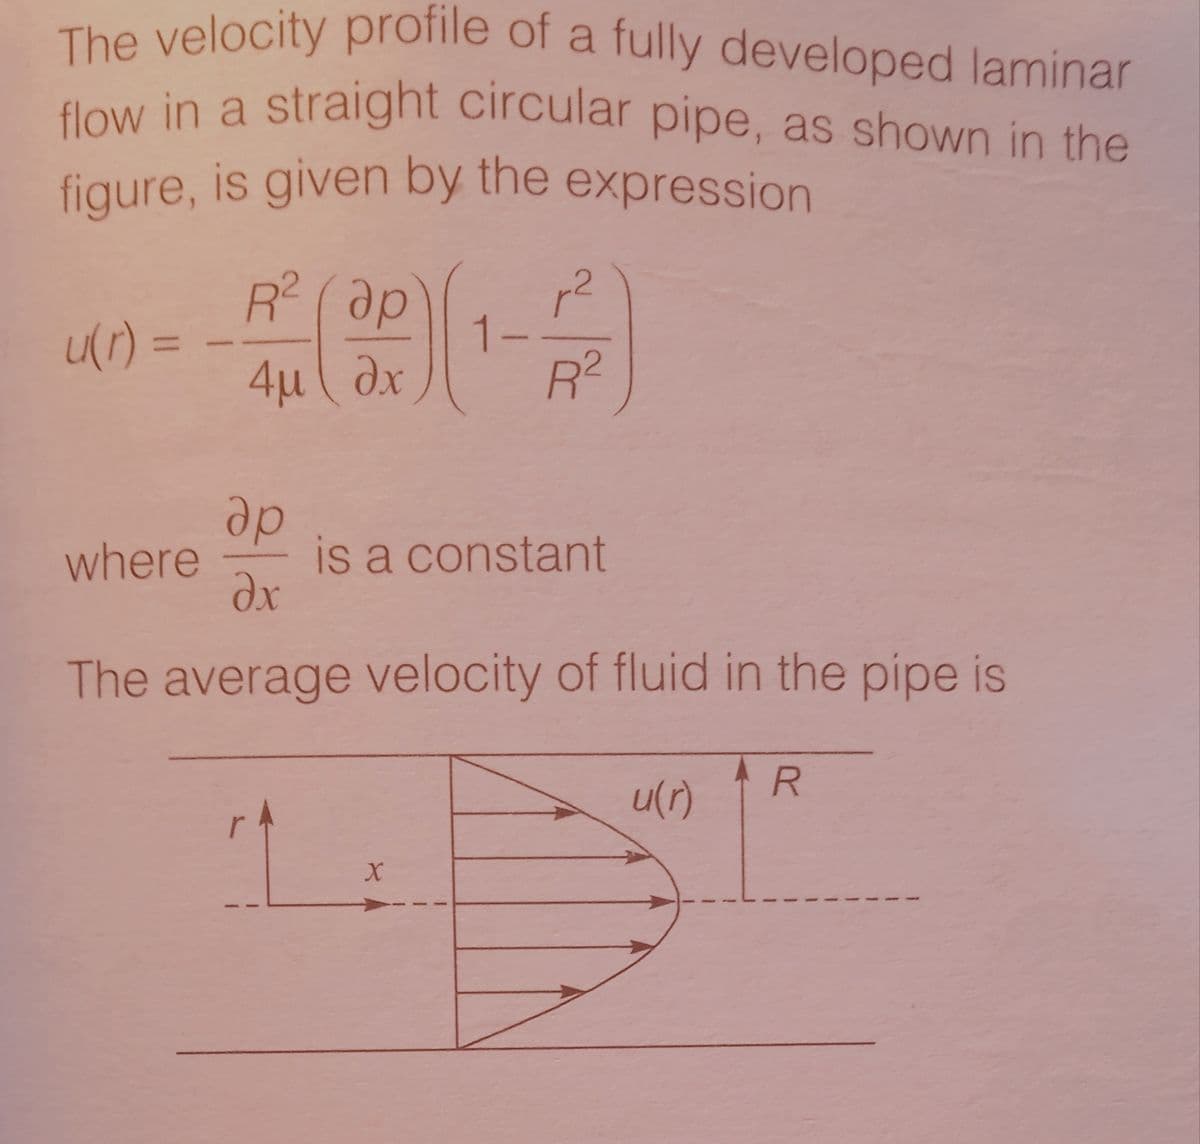 flow in a straight circular pipe, as shown in the
aw in a straight circular pipe, as shown in the
The velocity profile of a fully developed laminar
figure, is given by the expression
R? ( ap
72
ur) =
%3D
4u ( dx
R2
dp
is a constant
where
The average velocity of fluid in the pipe is
R
u(r)
